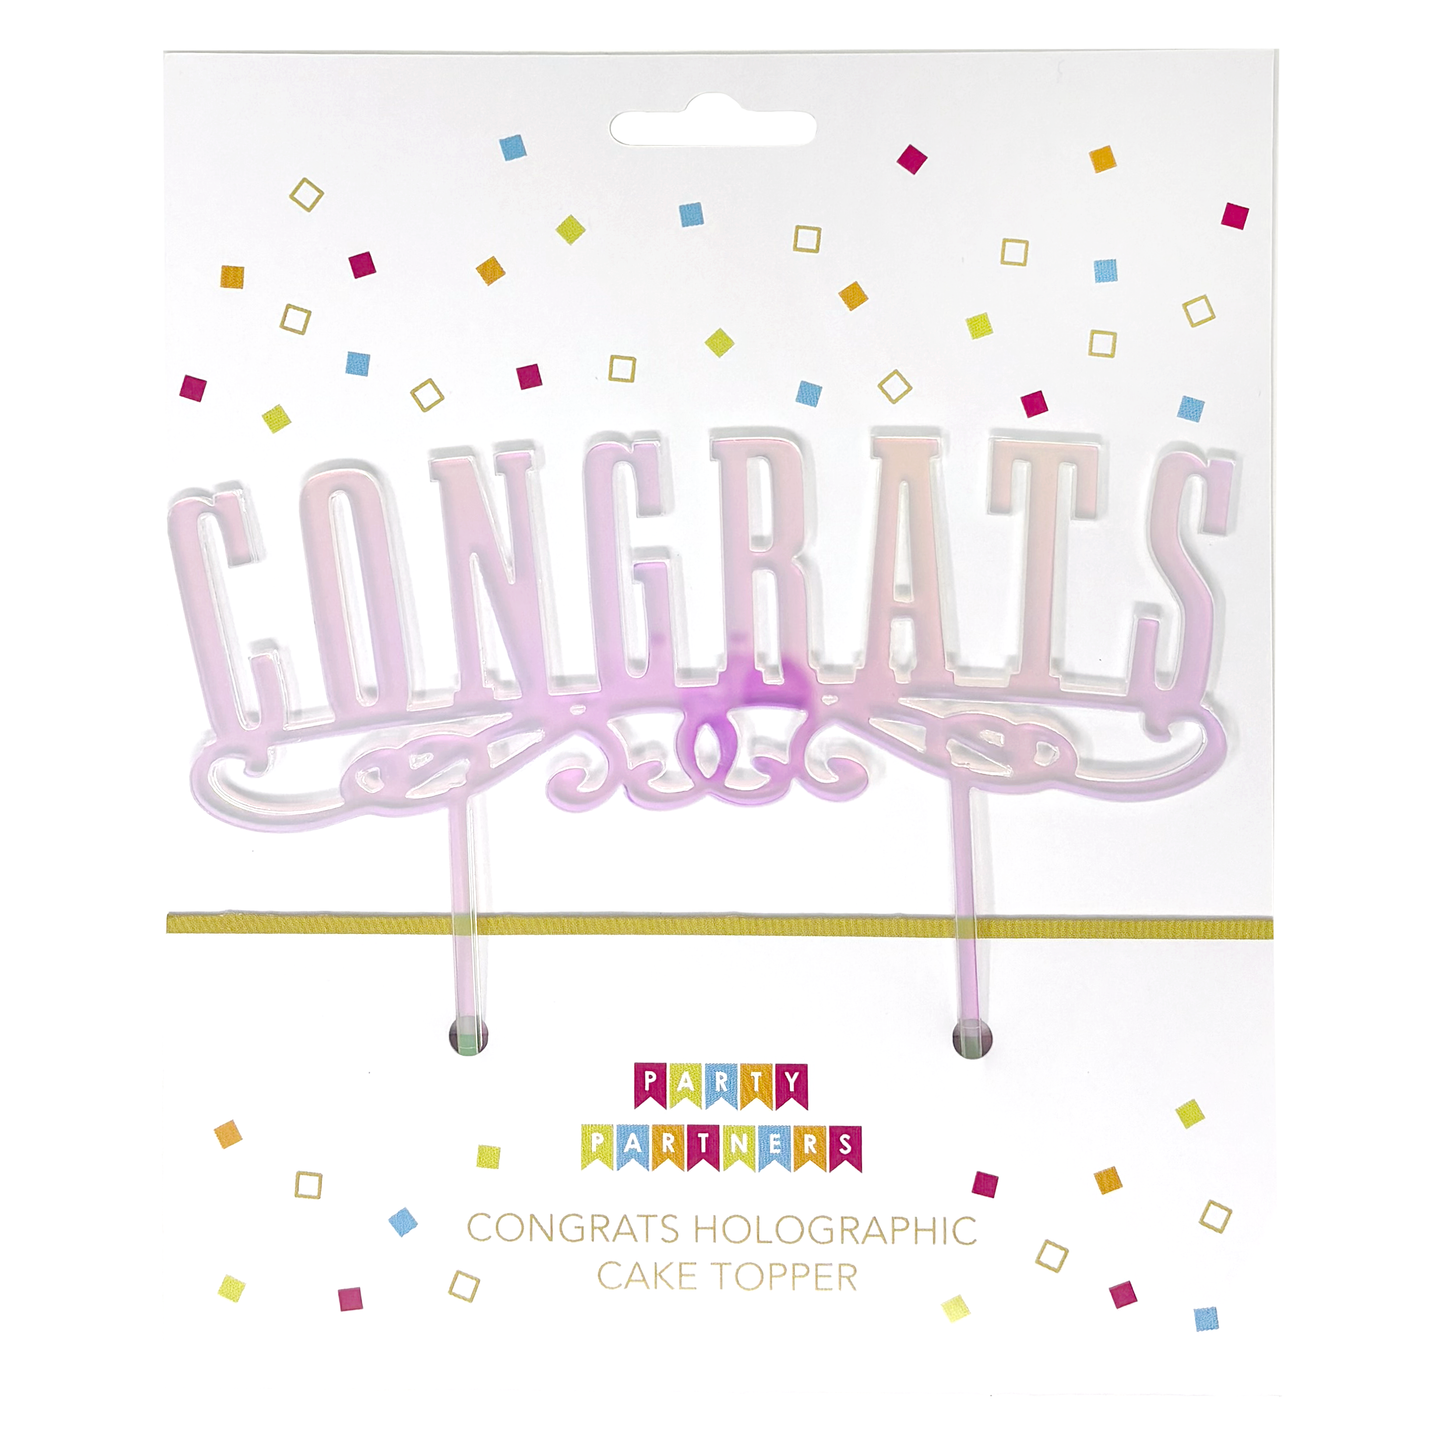 Congrats Holographic Cake Topper